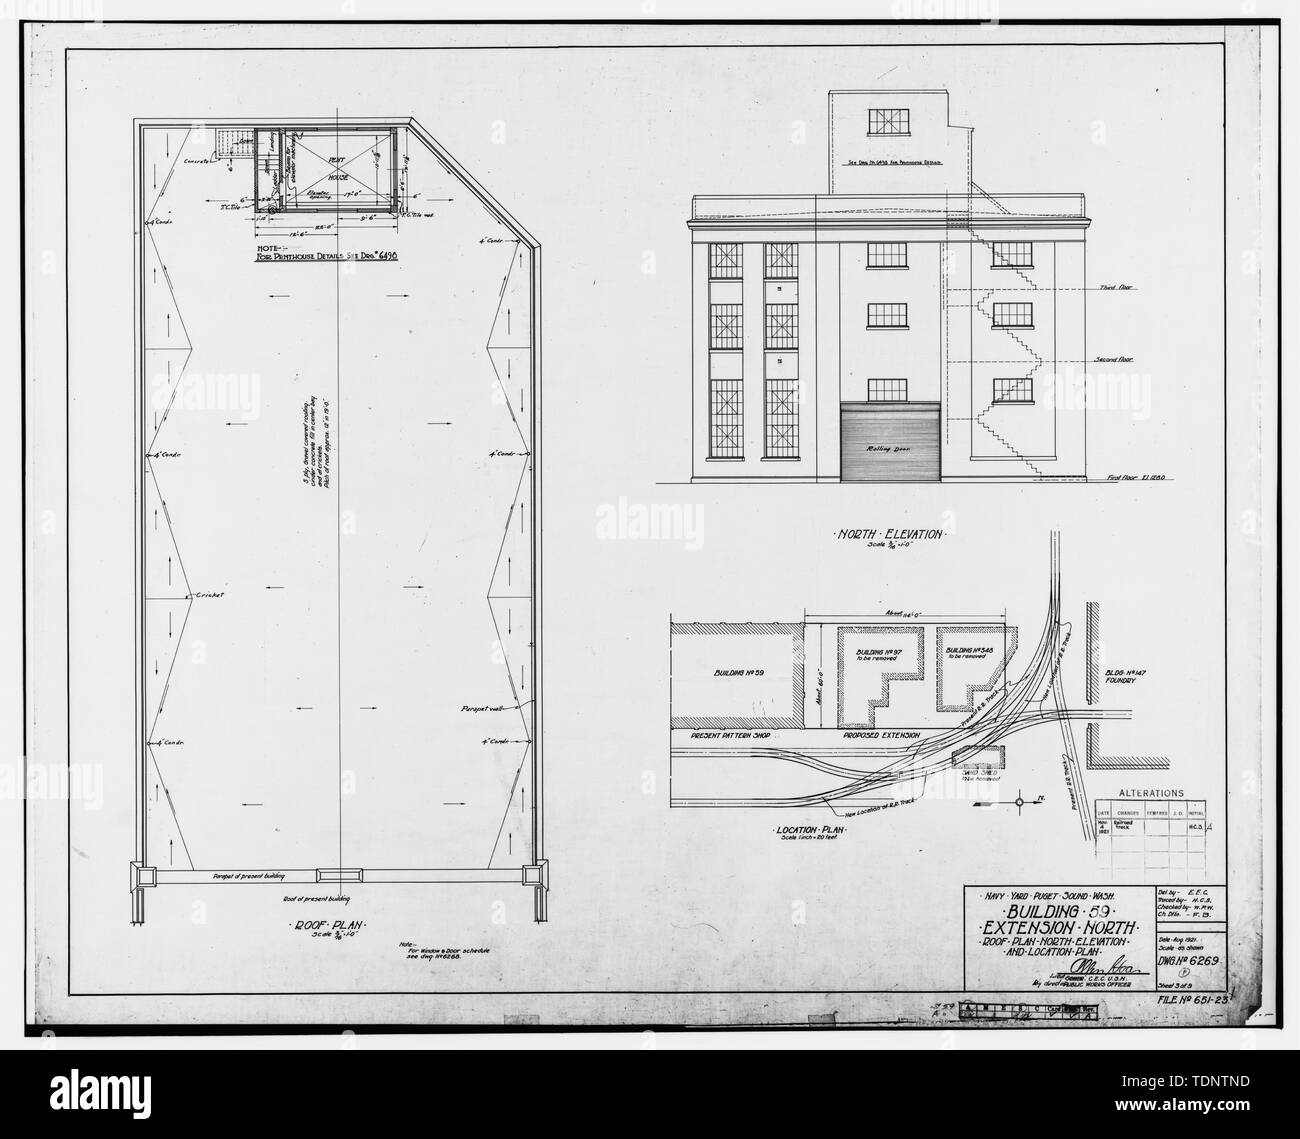 Photocopy Of 1921 Architectural Drawing Titled Building 59 Extension North Roof Plan North Elevation And Location